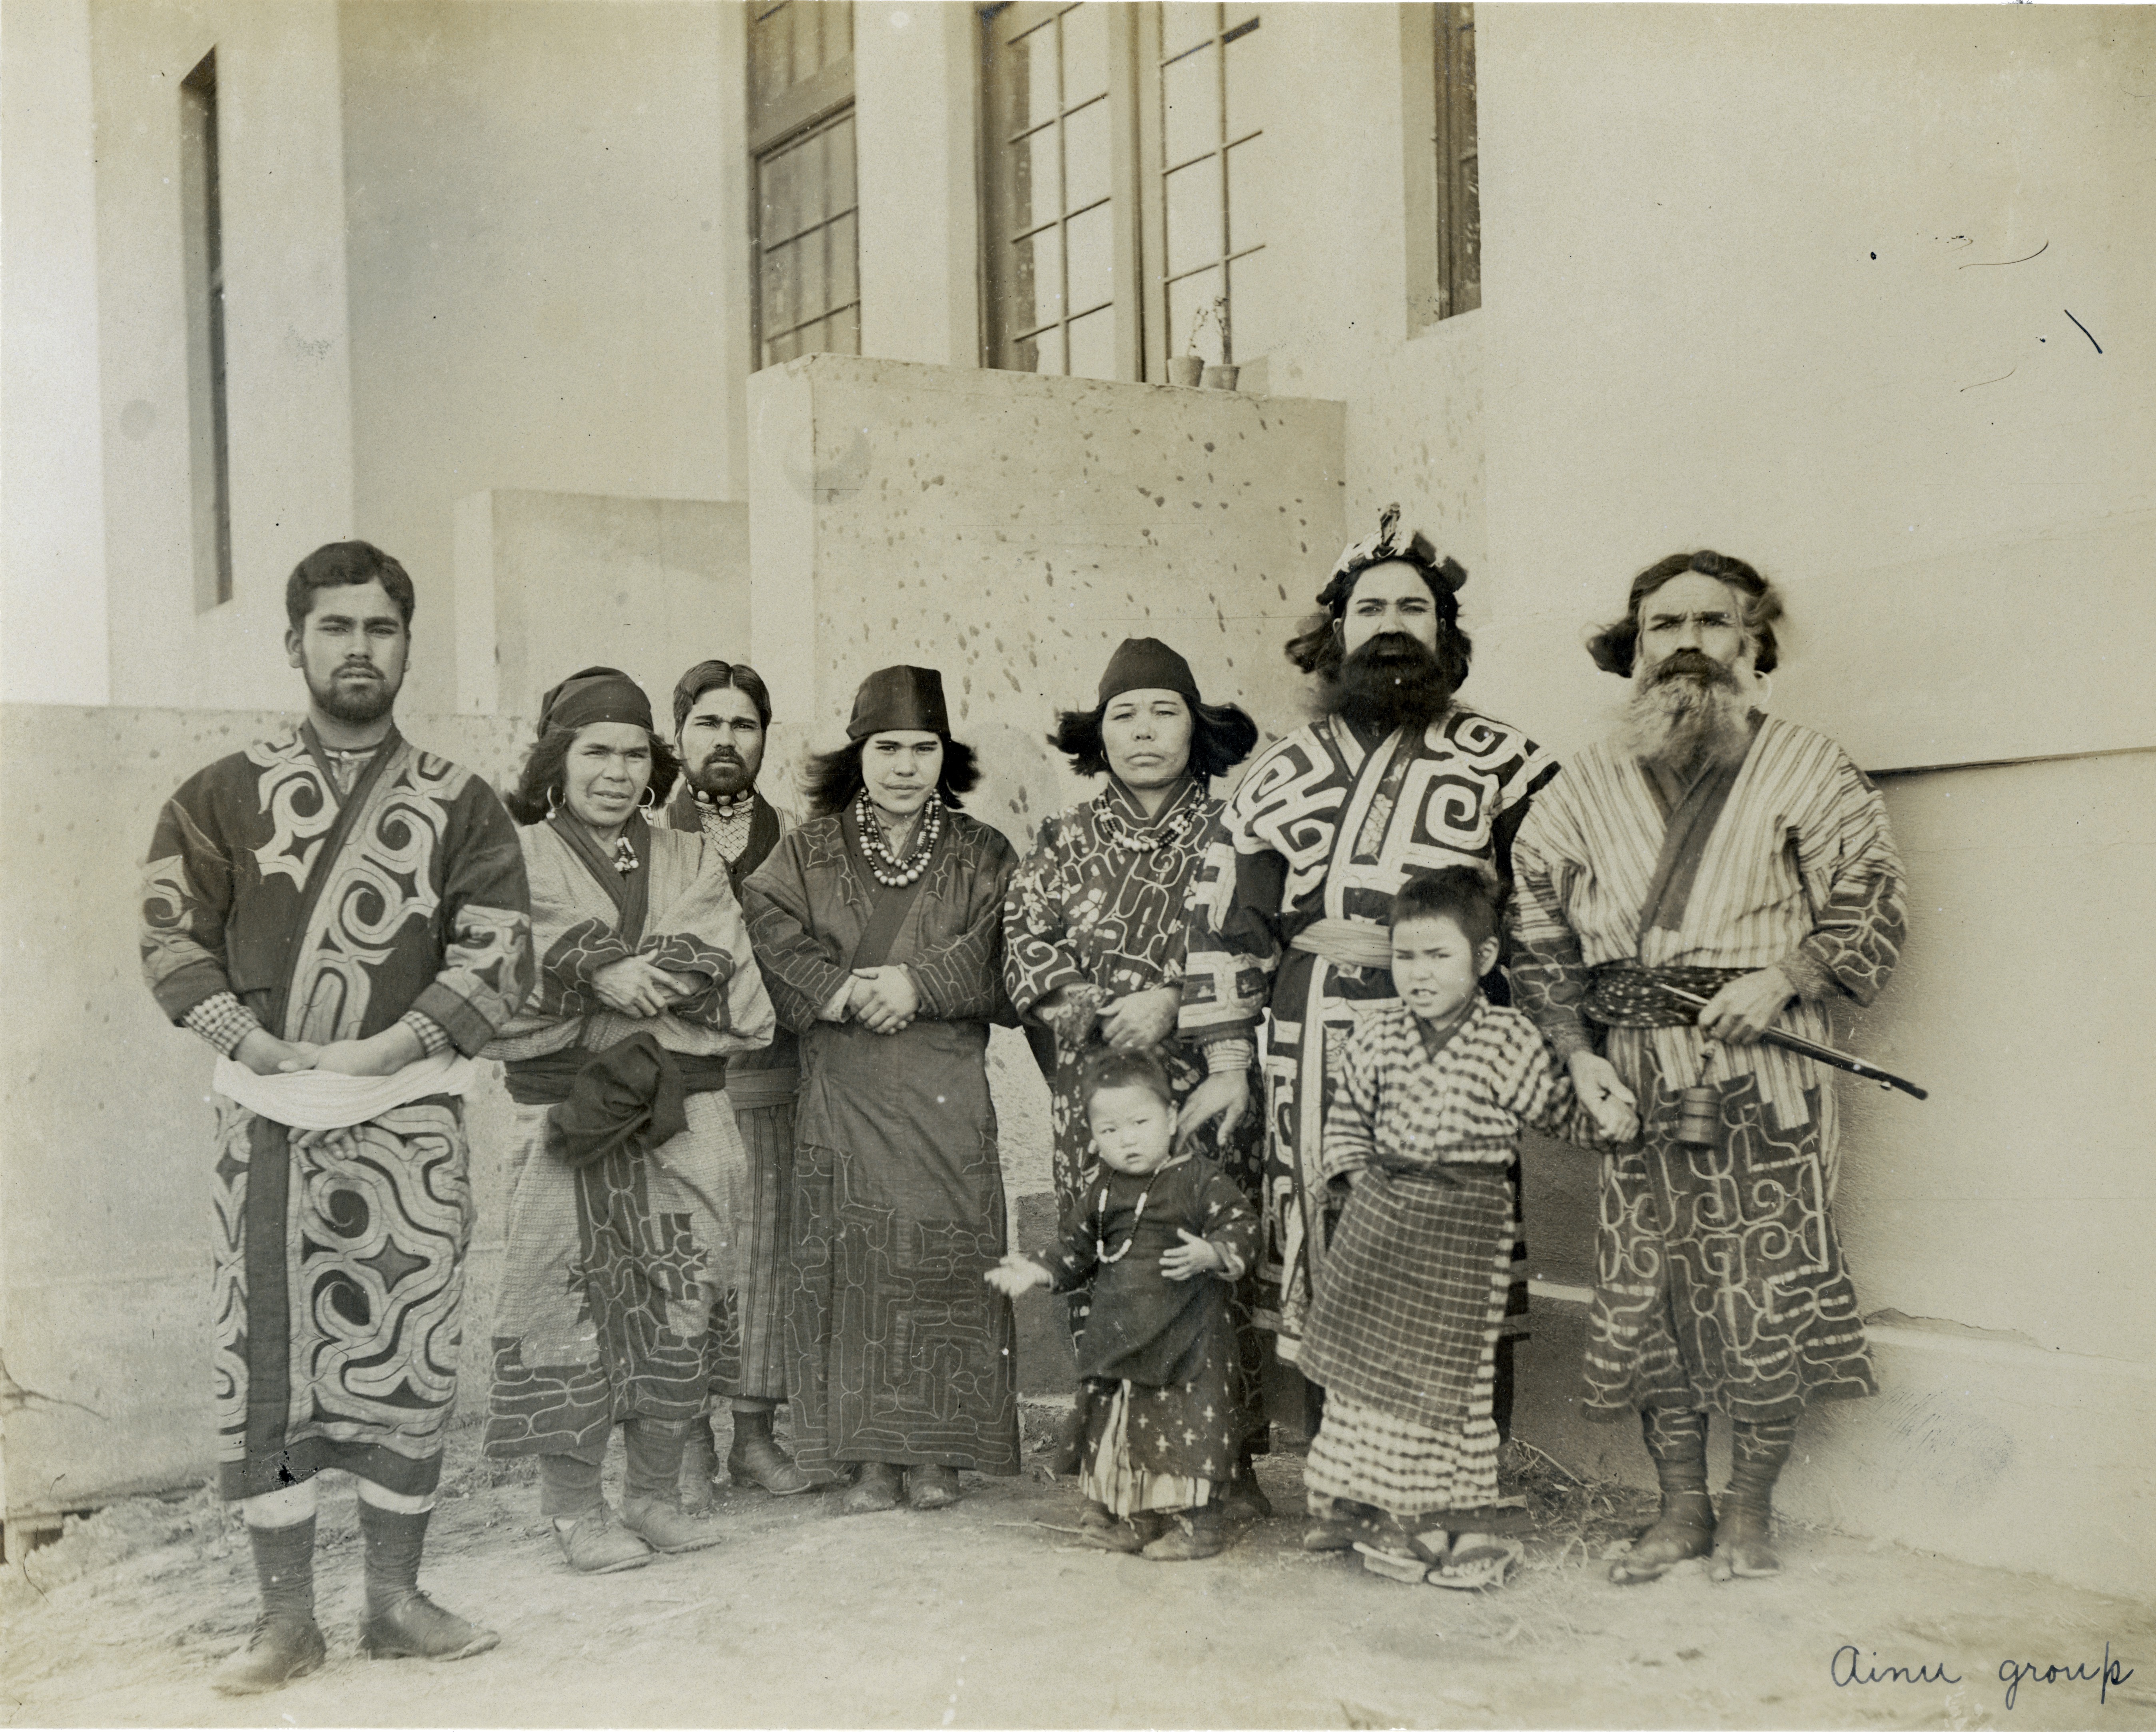 A group of Ainu people on display as part of an exhibit at the 1904 World's Fair in St. Louis, Missouri.